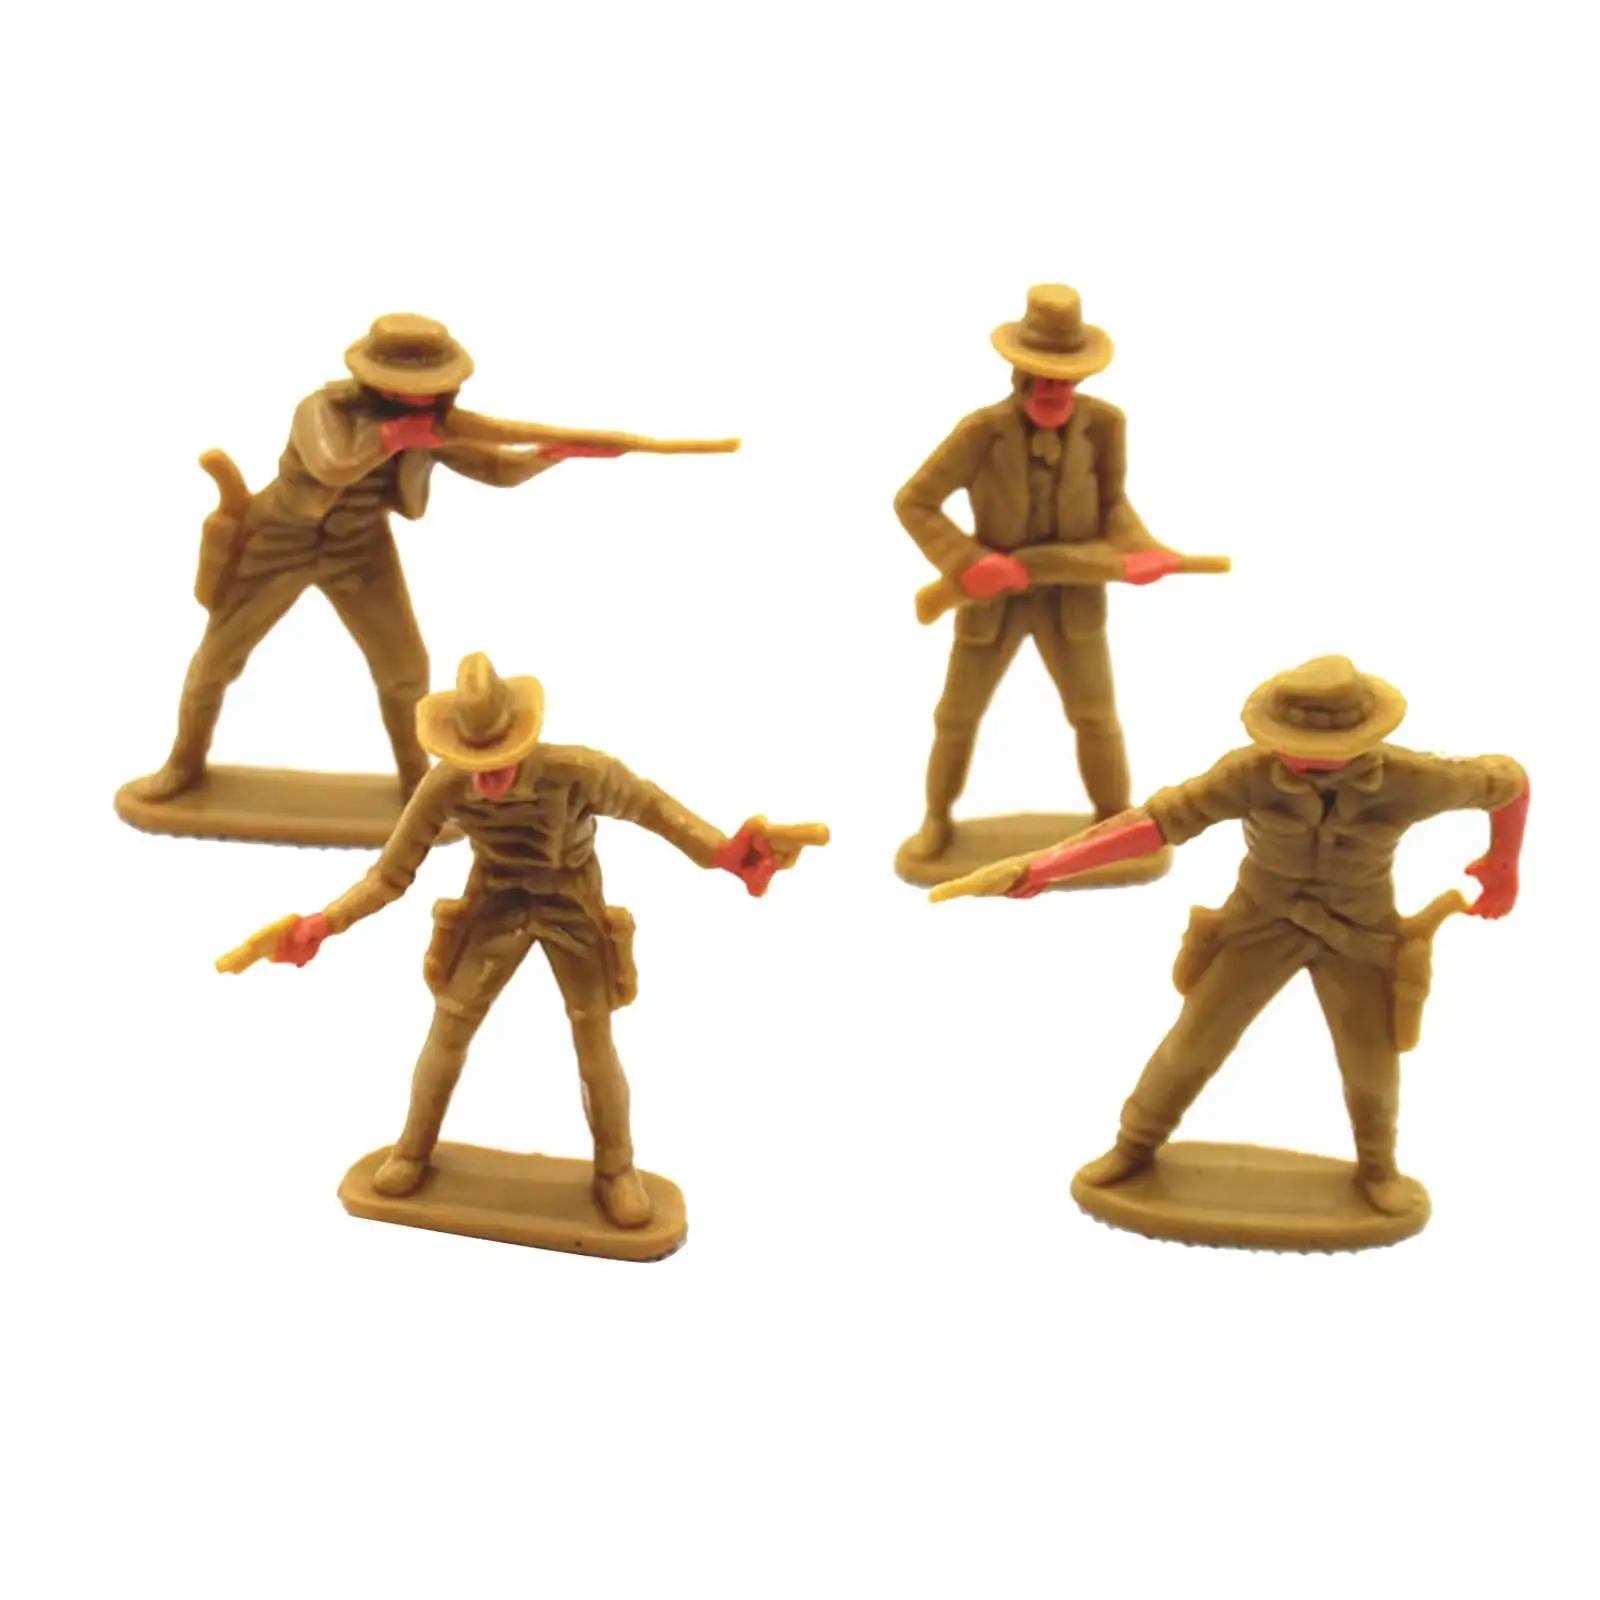 4 Pieces Simulation Cowboy People Figures Layout Realistic Figurines